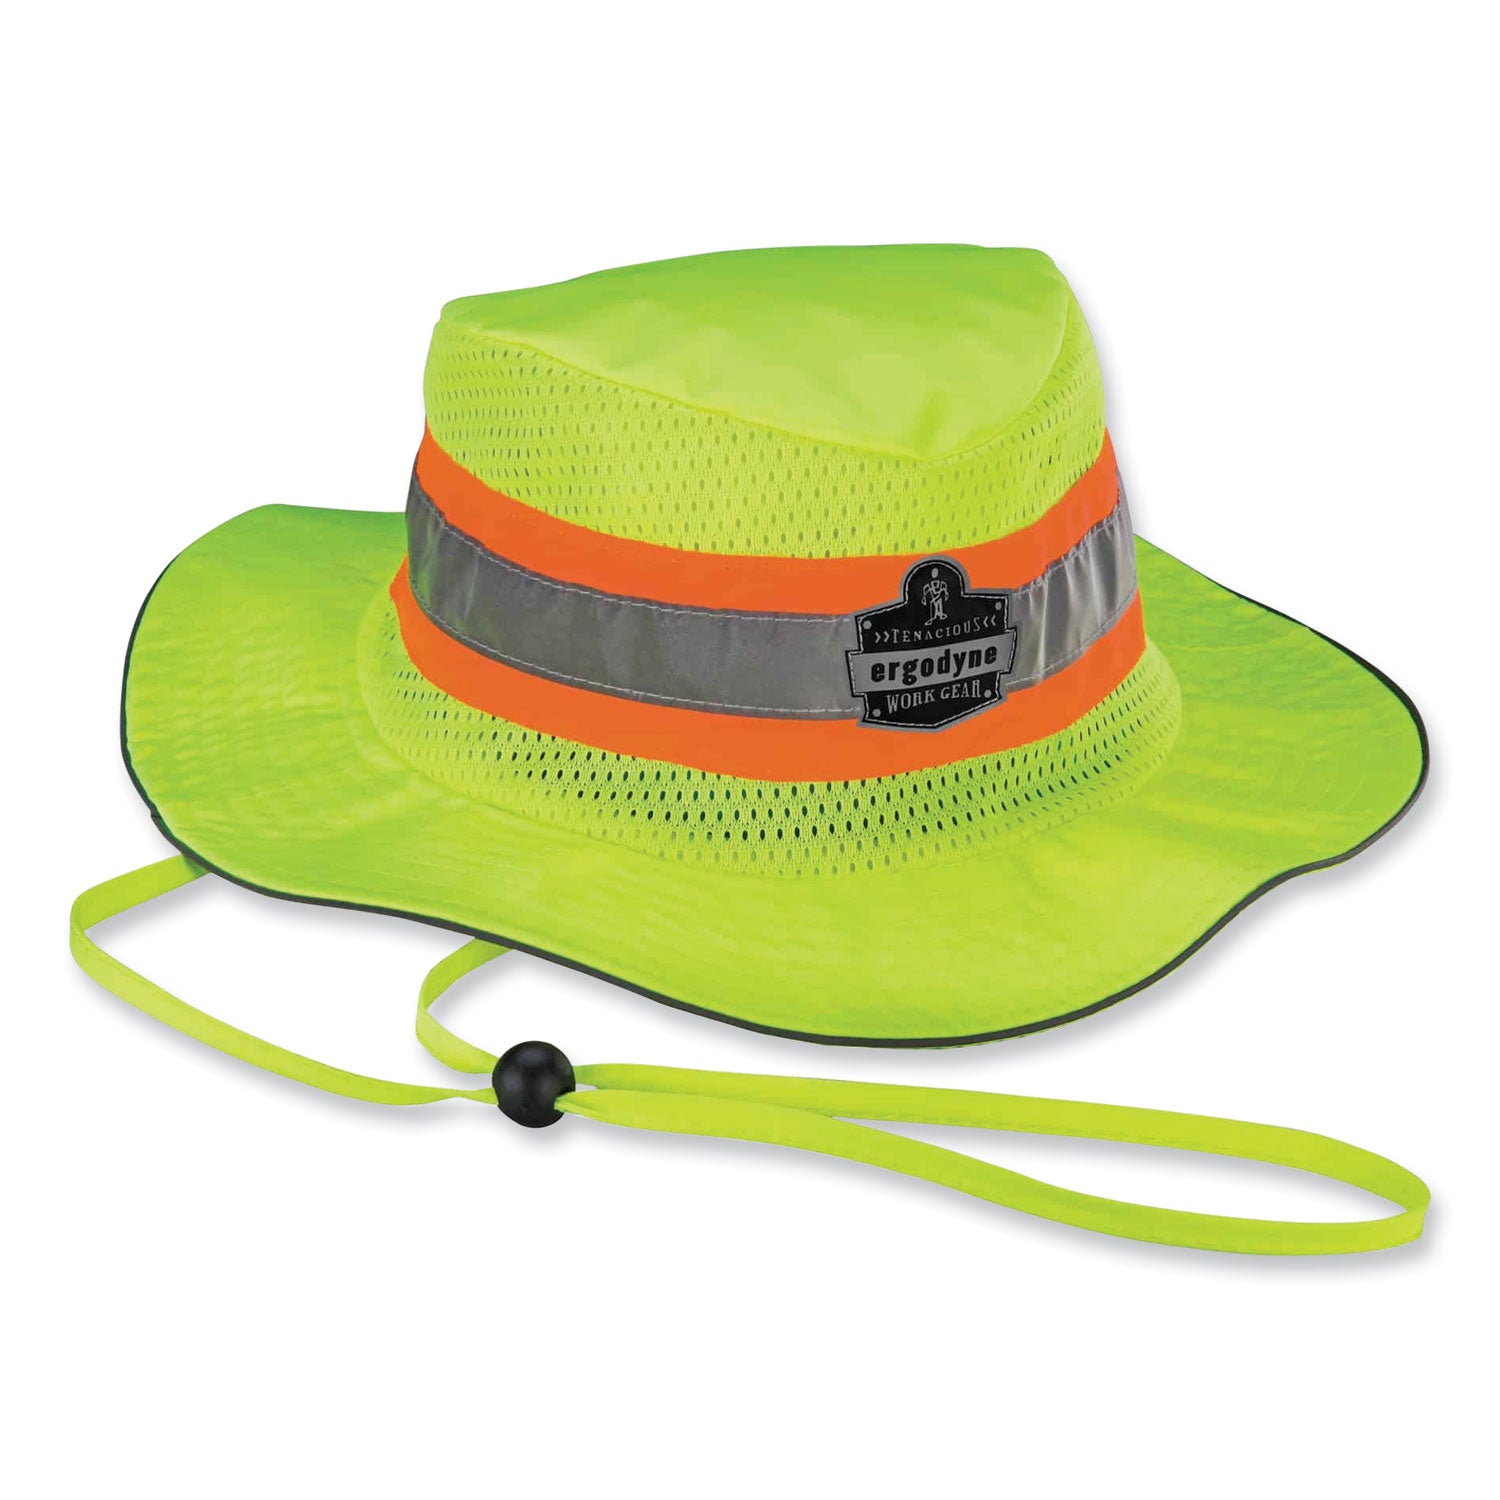 chill-its-8935mf-hi-vis-microfiber-ranger-sun-hat-large-x-large-lime-ships-in-1-3-business-days_ego12595 - 1